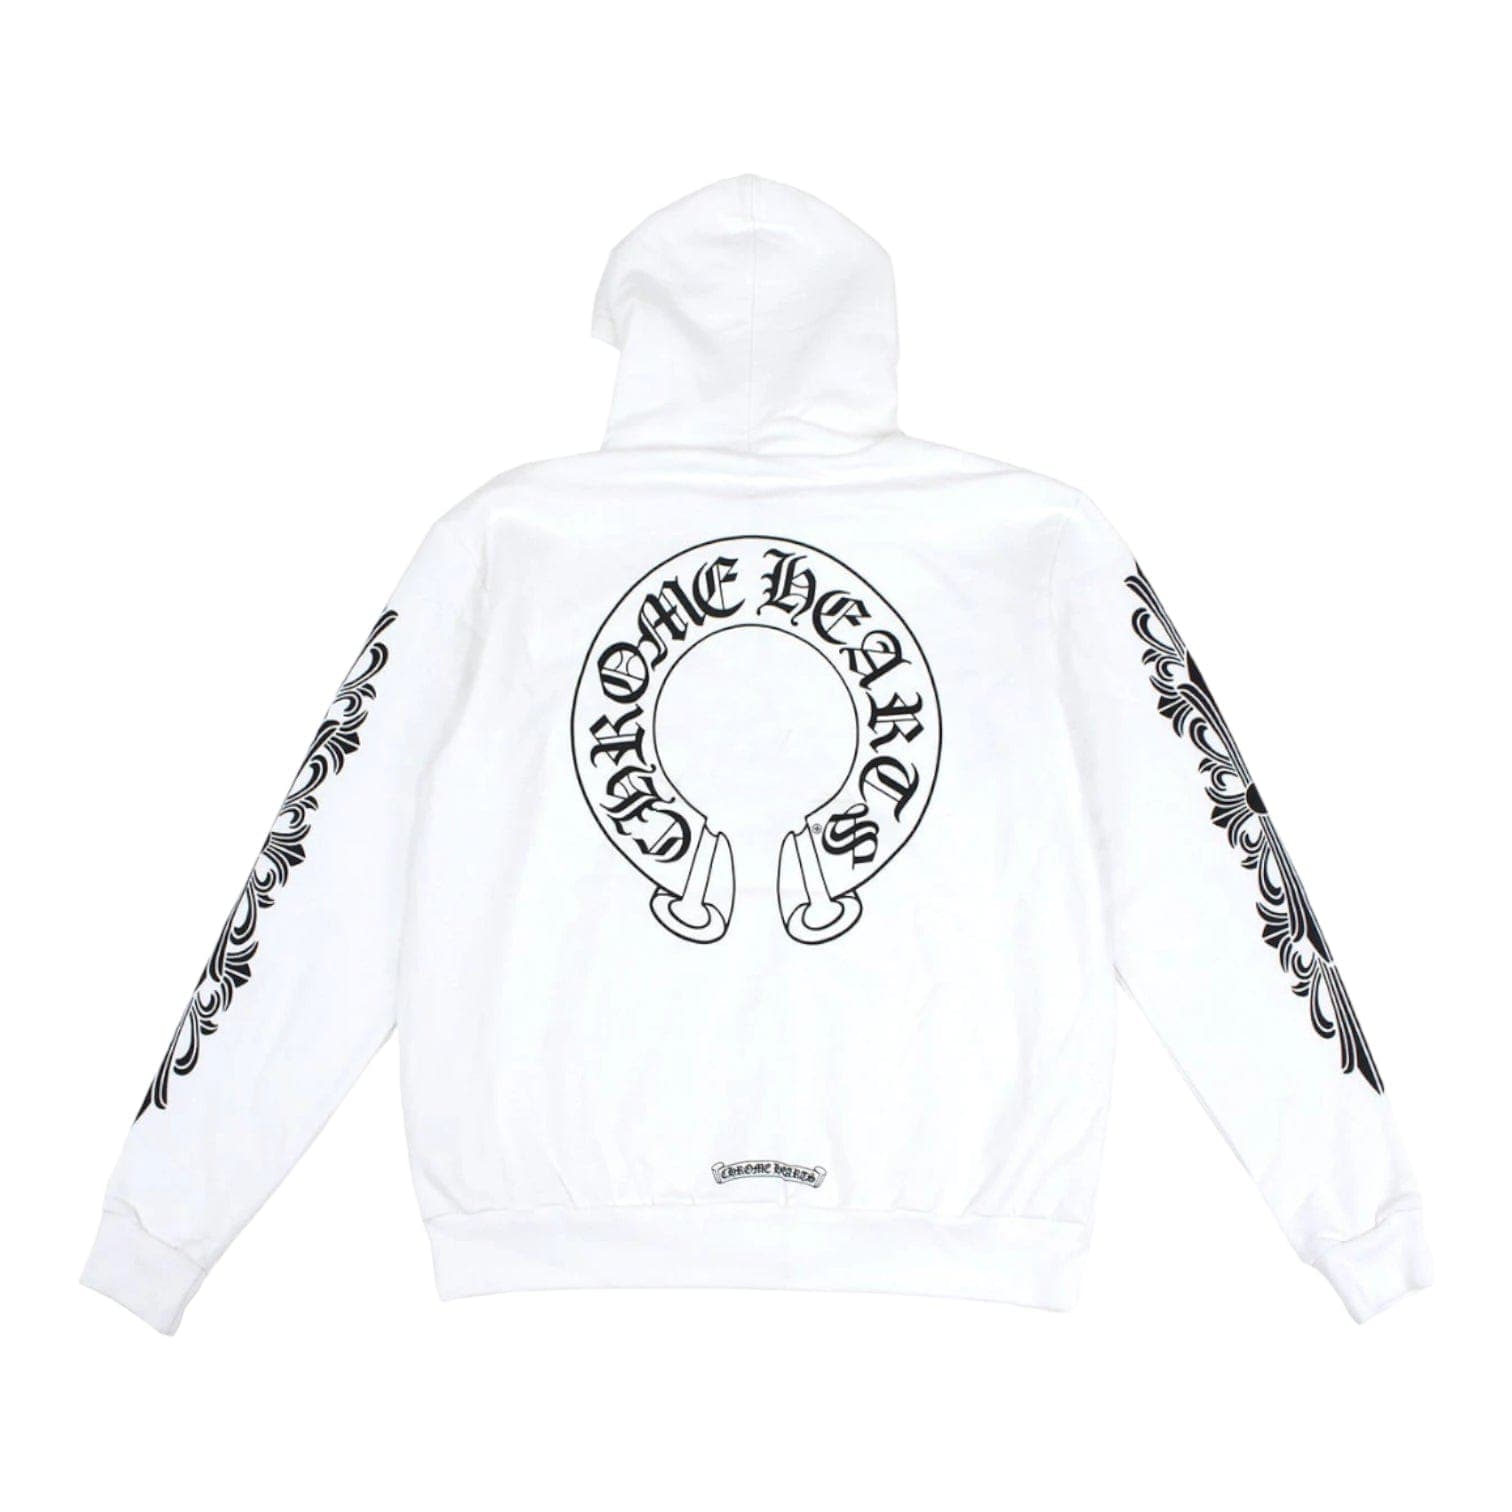 Chrome Hearts Floral Cross Zip Hoodie 'White